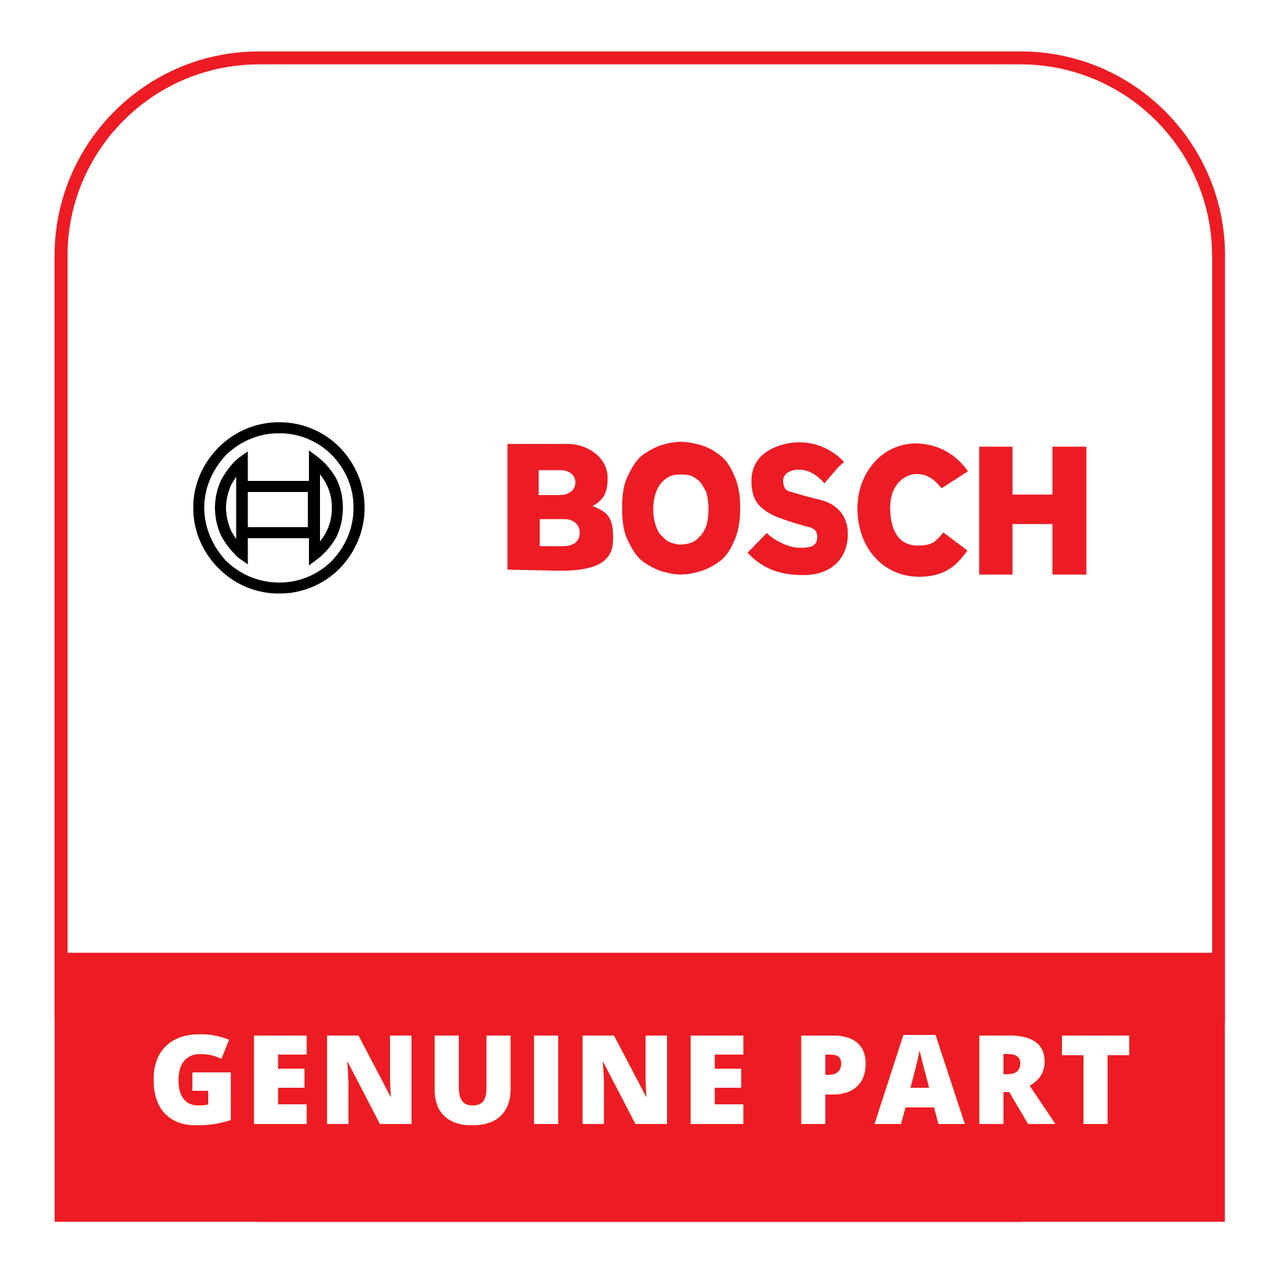 Bosch (Thermador) 10014027 - Diode-Led - Genuine Bosch (Thermador) Part